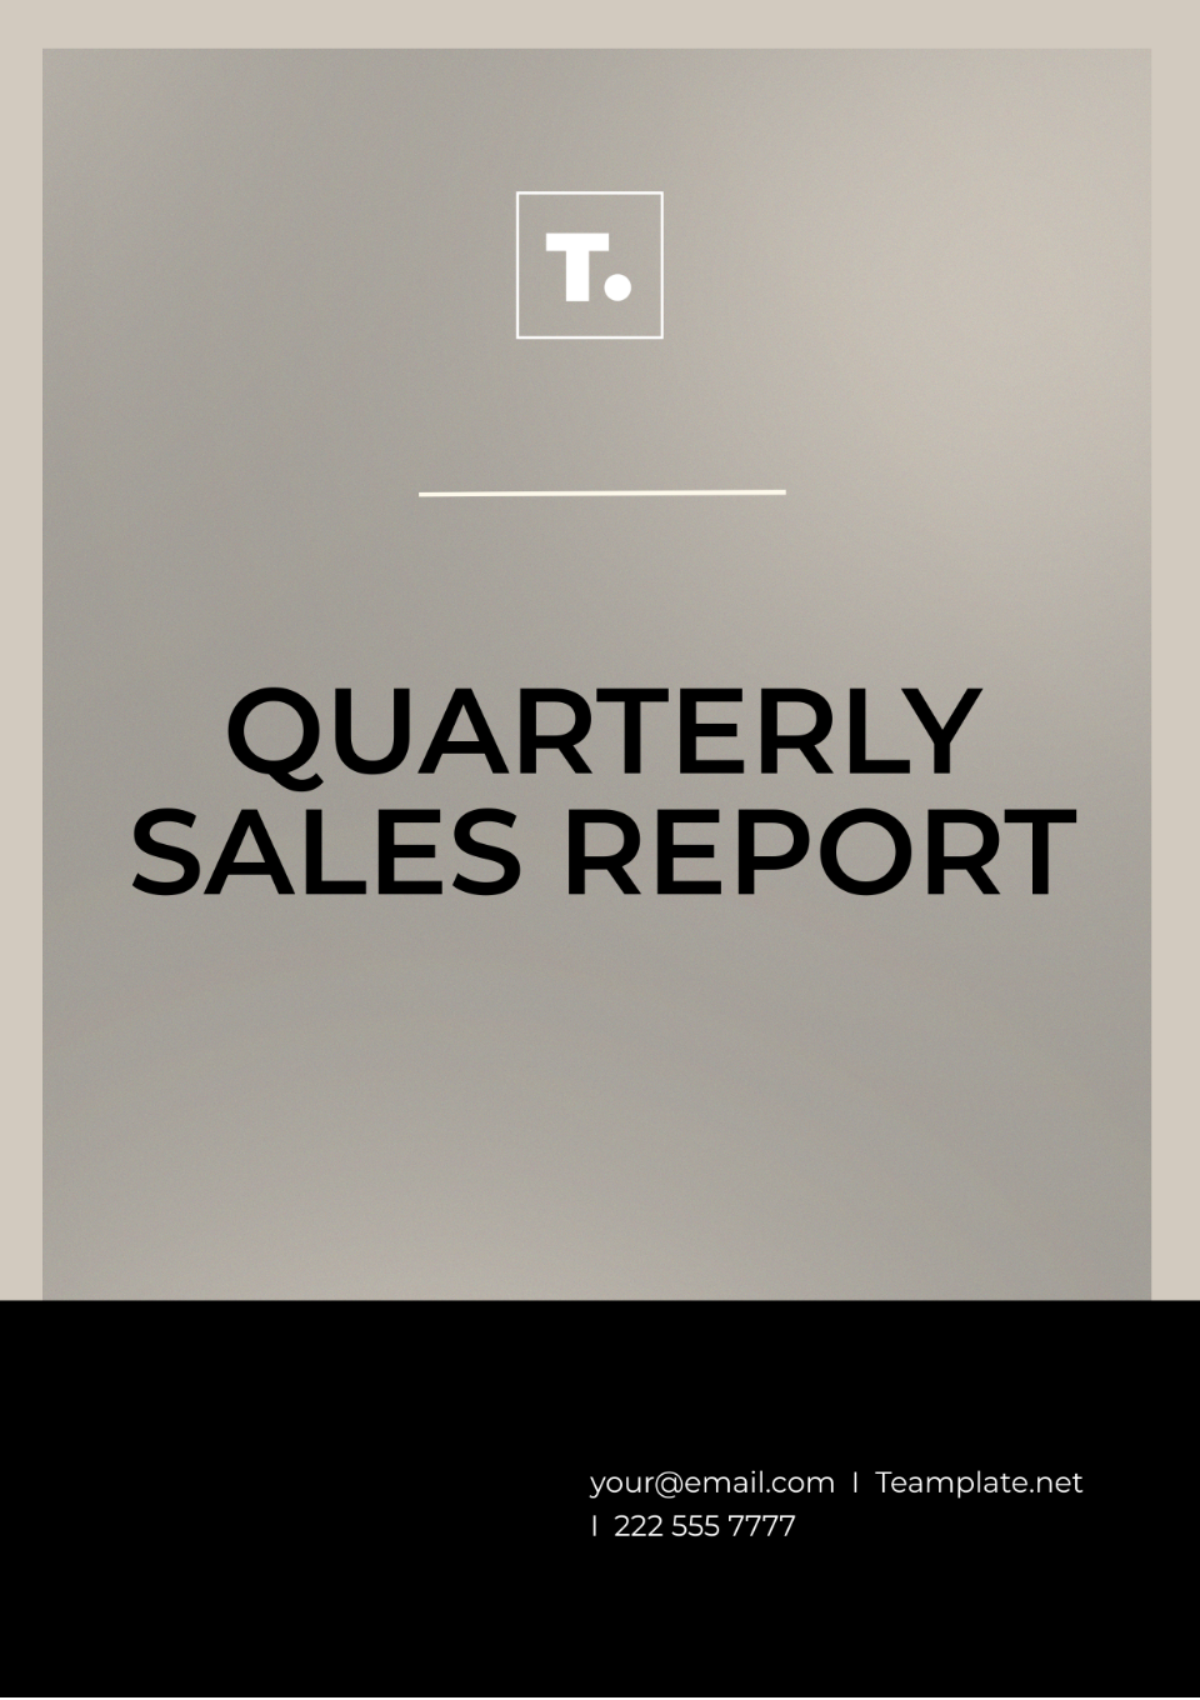 Quarterly Sales Report Template